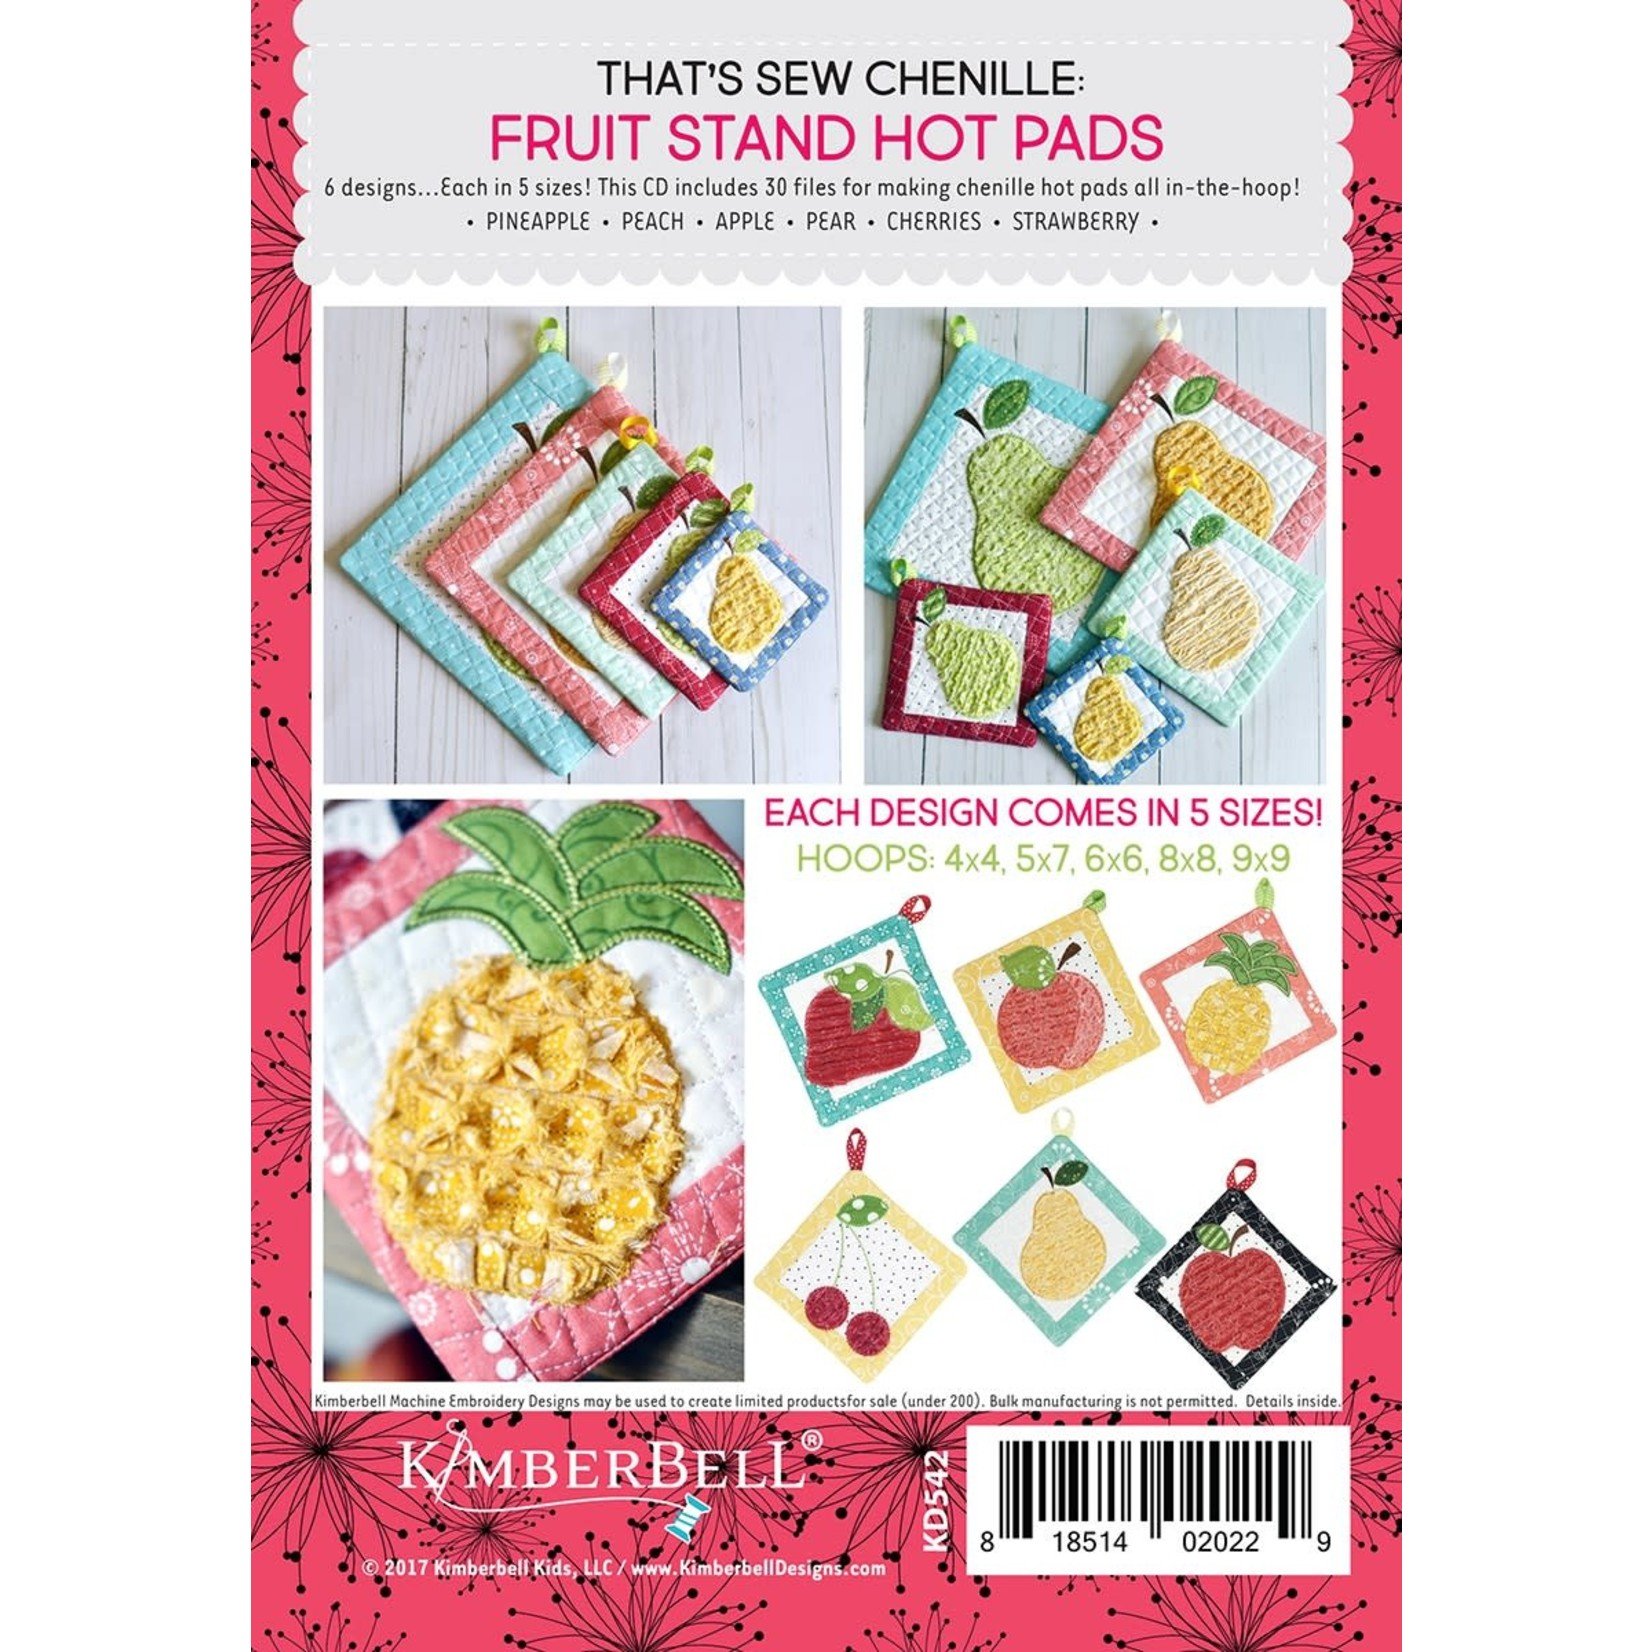 Kimberbell Designs That's Sew Chenille: Fruit Stand Hot Pads Machine Embroidery CD